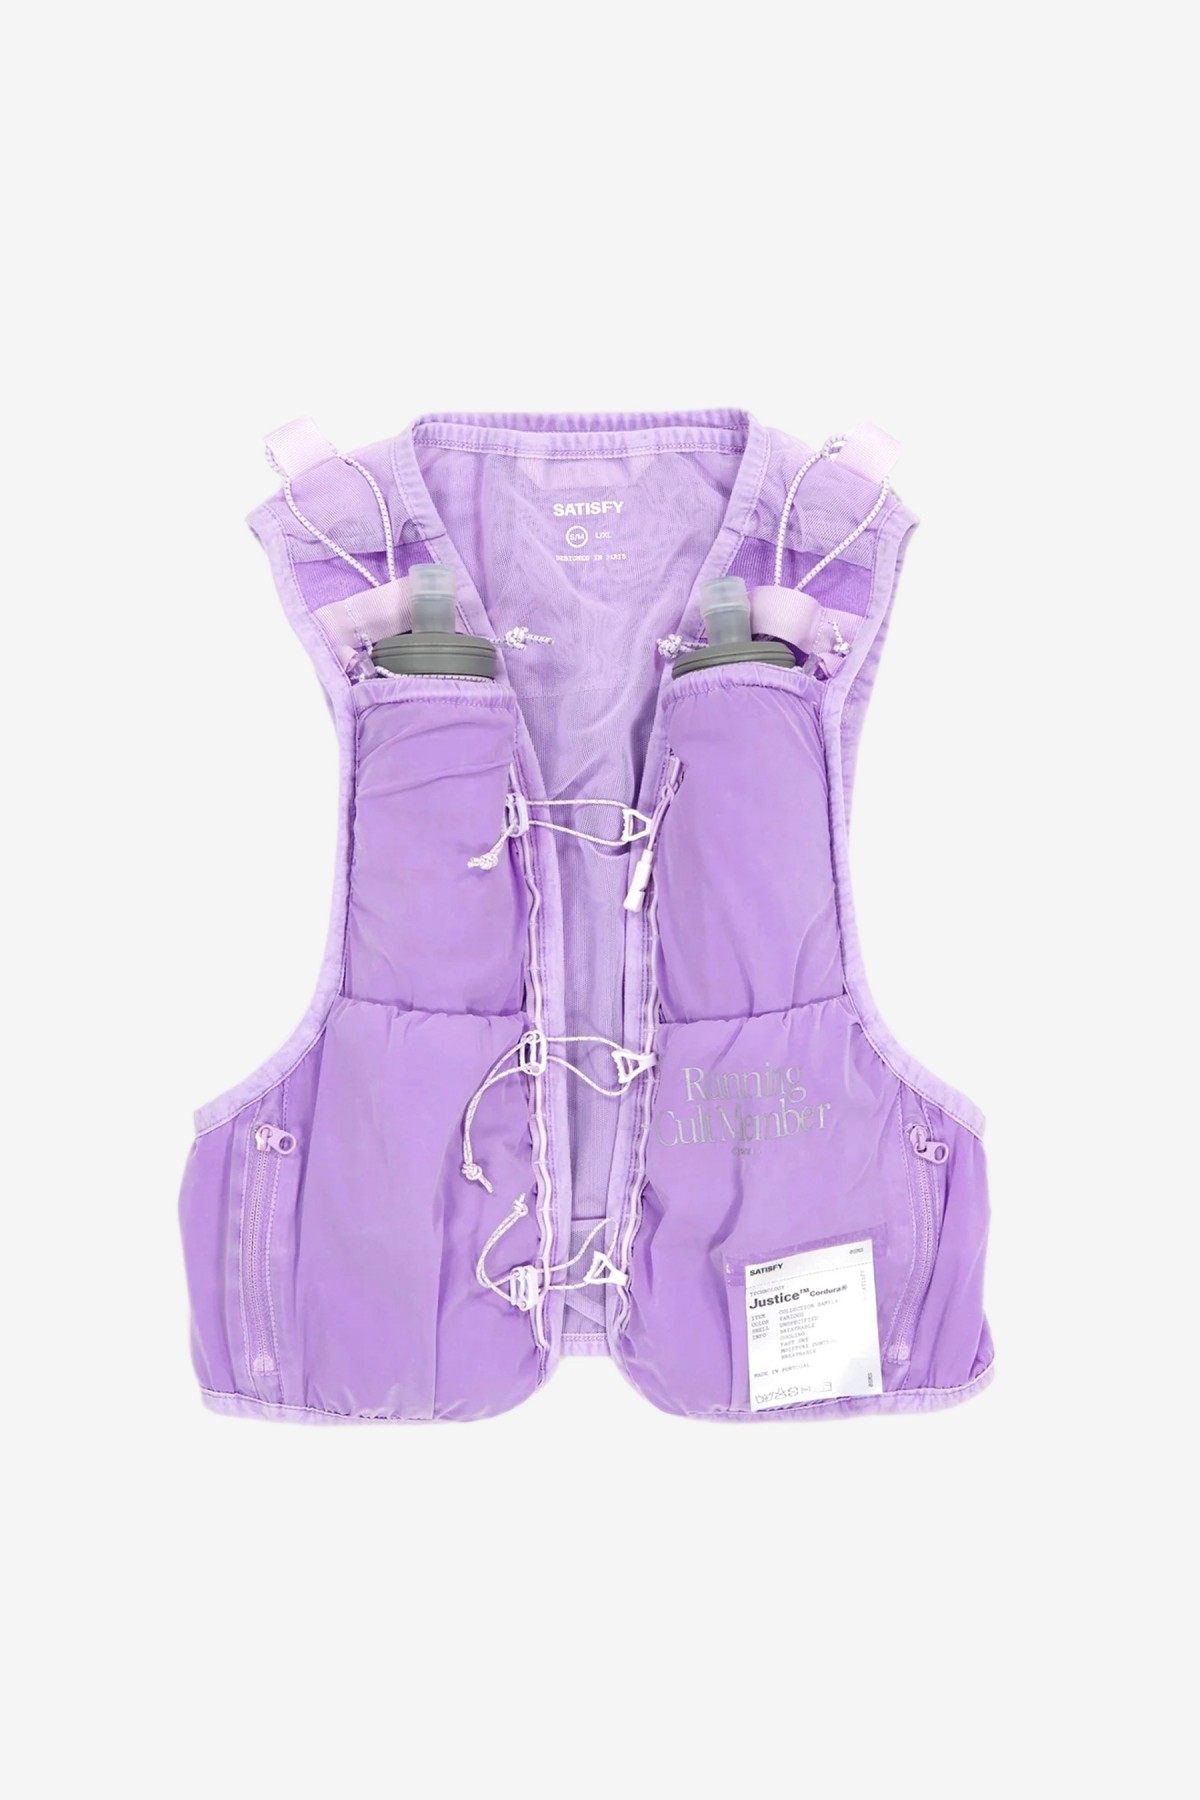 Satisfy Running Justice Cordura Hydration Vest 5L in Mineral Lilac